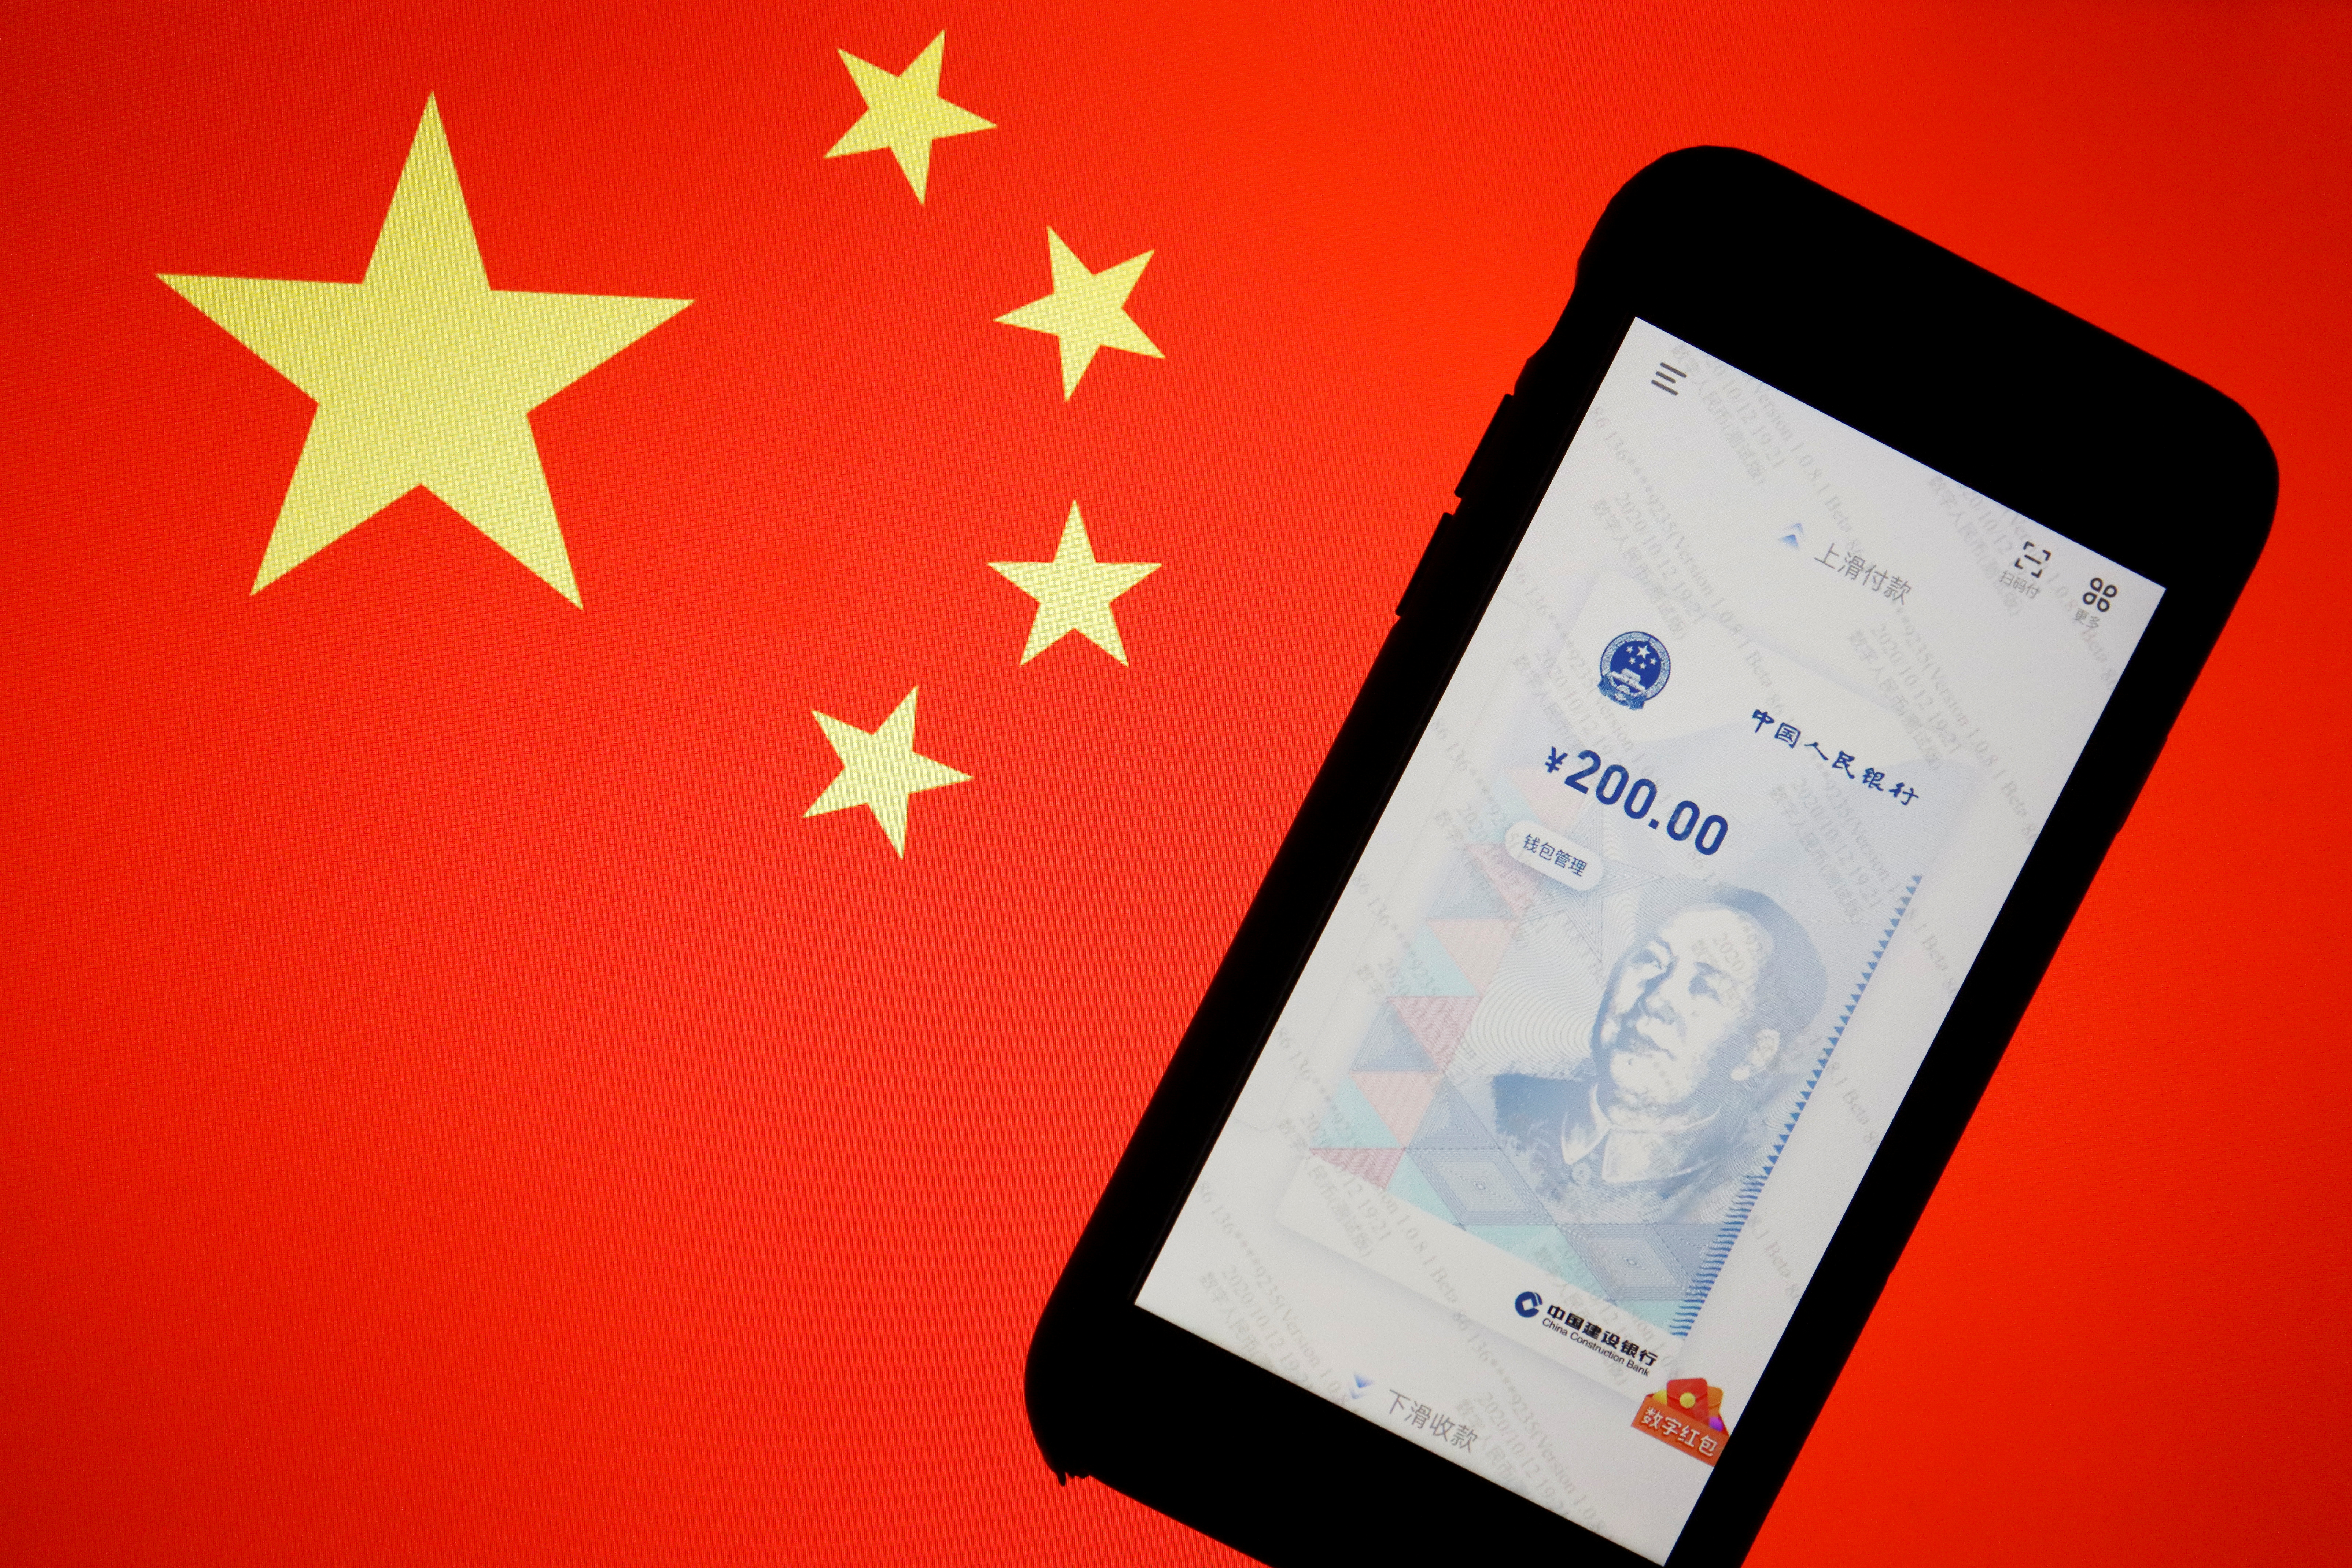 FILE PHOTO: FILE PHOTO: China's official app for digital yuan is seen on a mobile phone placed in front of an image of the Chinese flag, in this illustration picture taken October 16, 2020. REUTERS/Florence Lo/File Photo